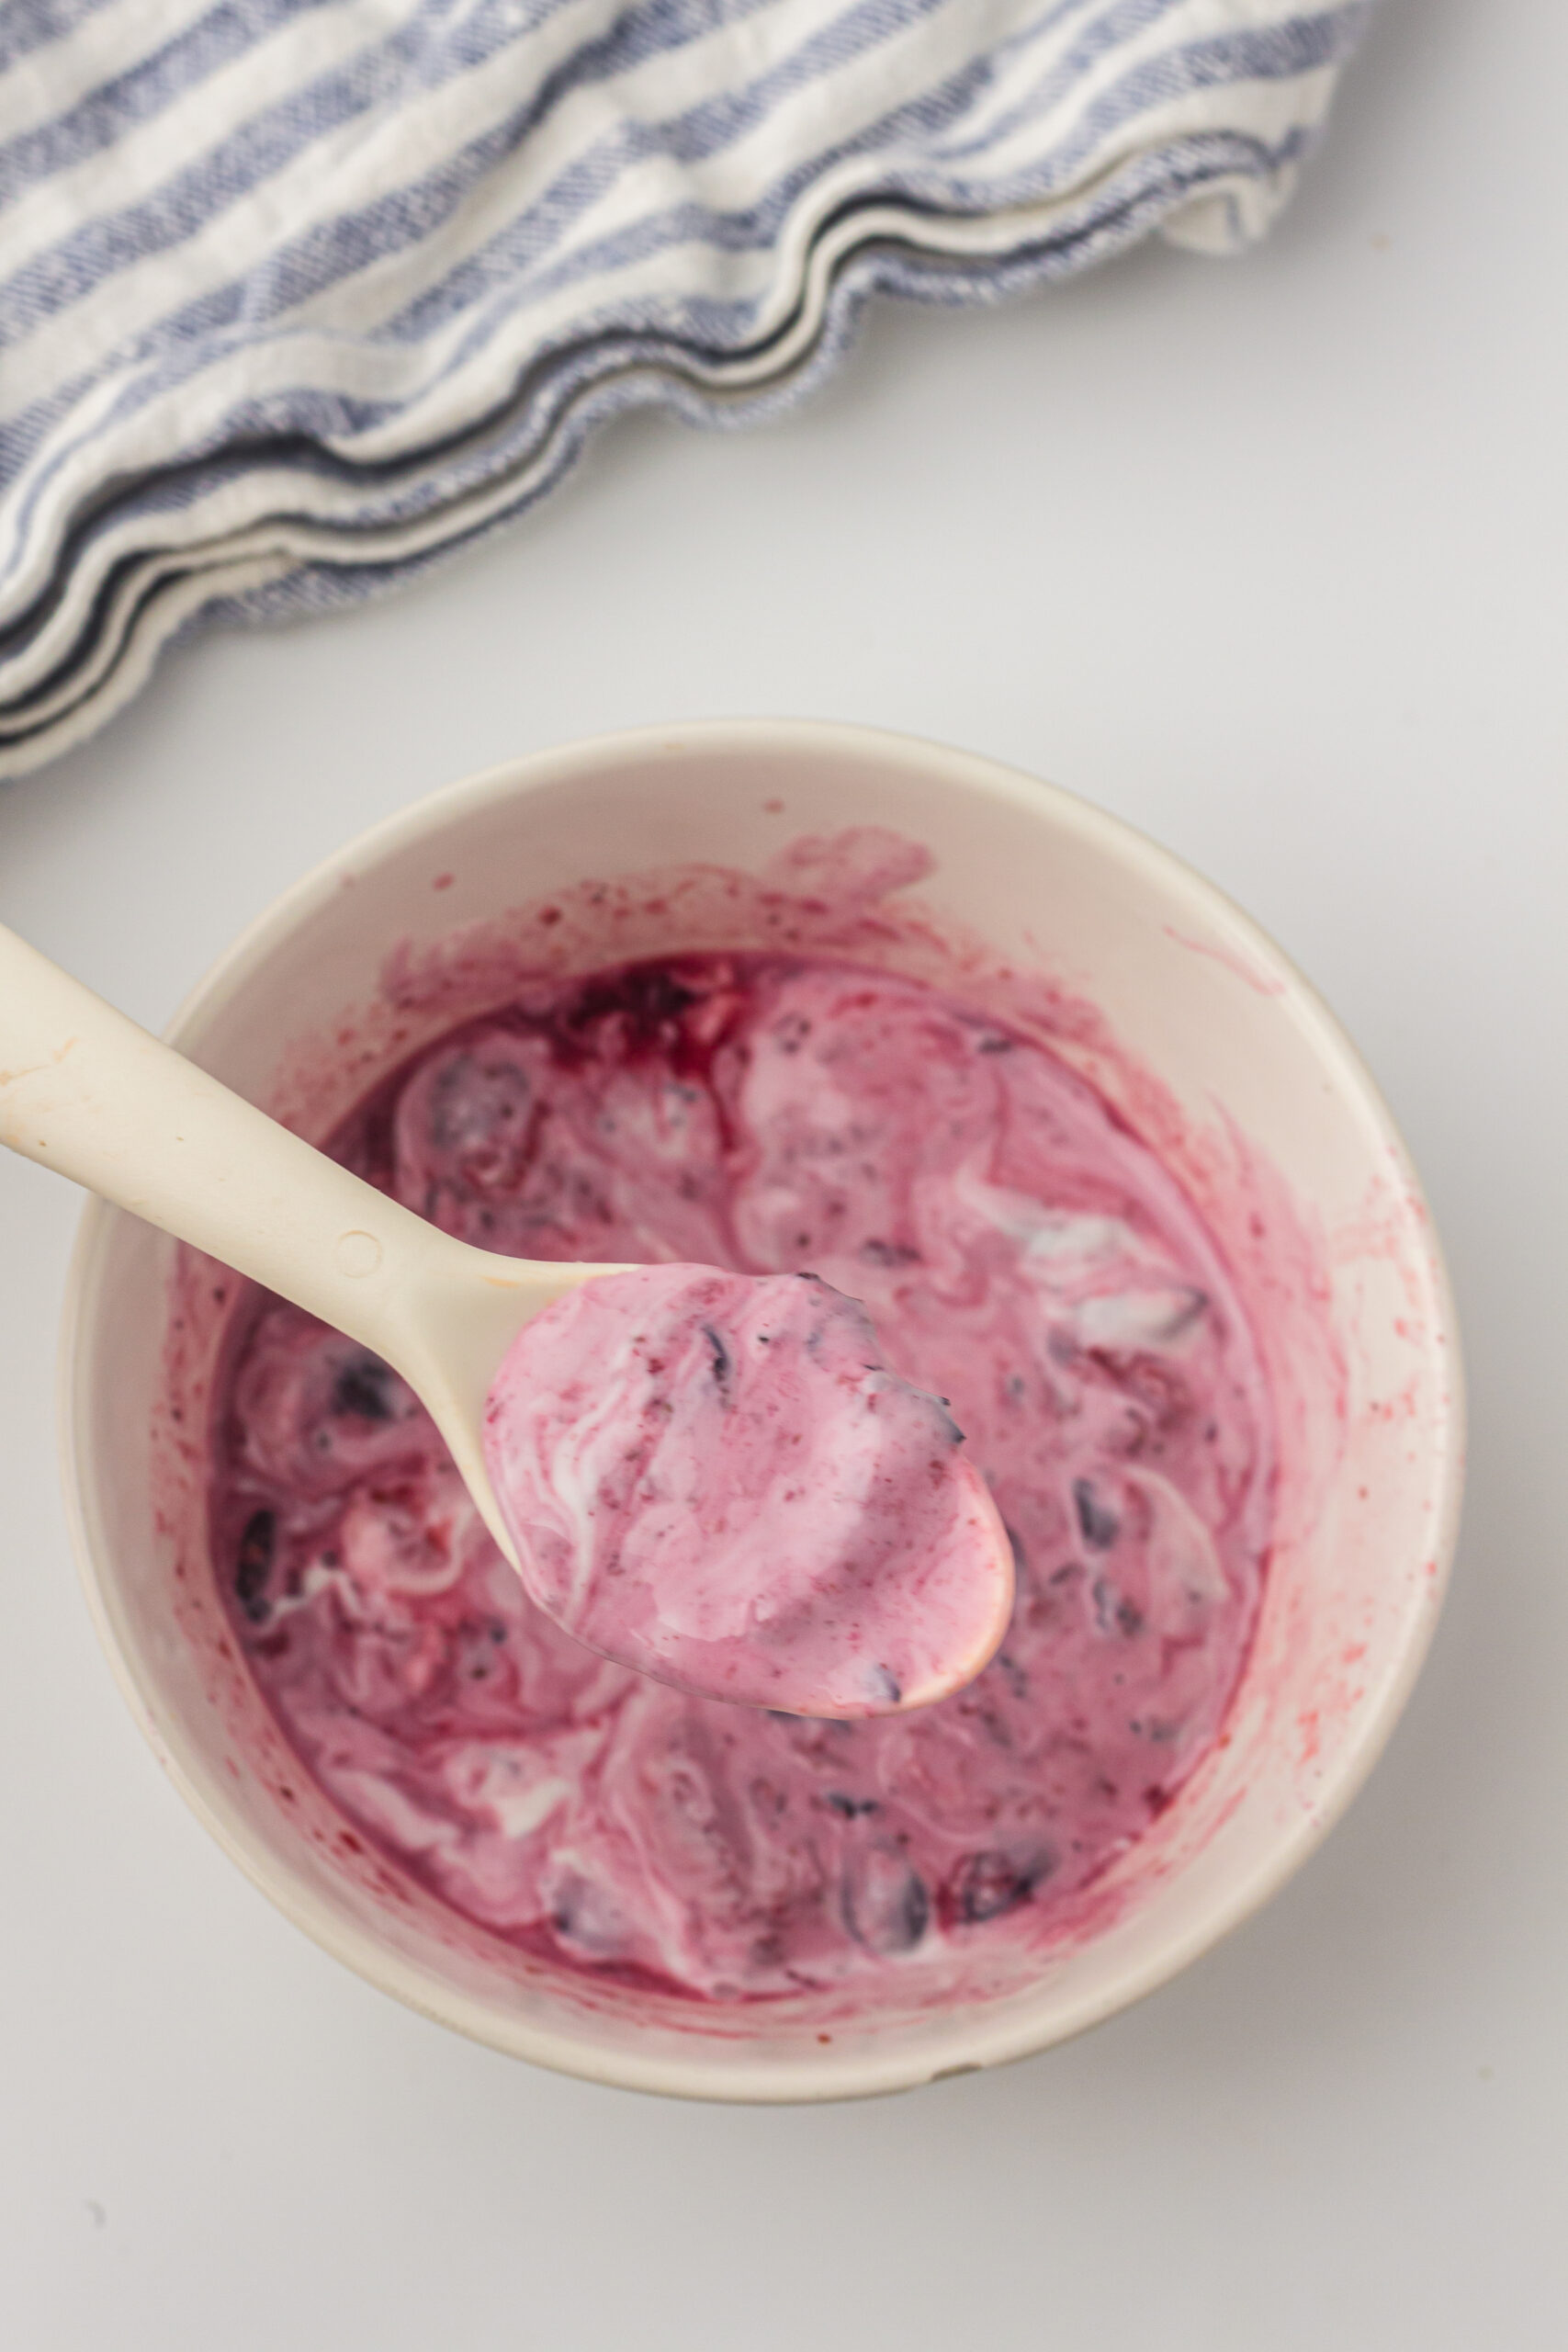 Yogurt and Berries for Babies and Toddlers: A Quick Snack or Breakfast